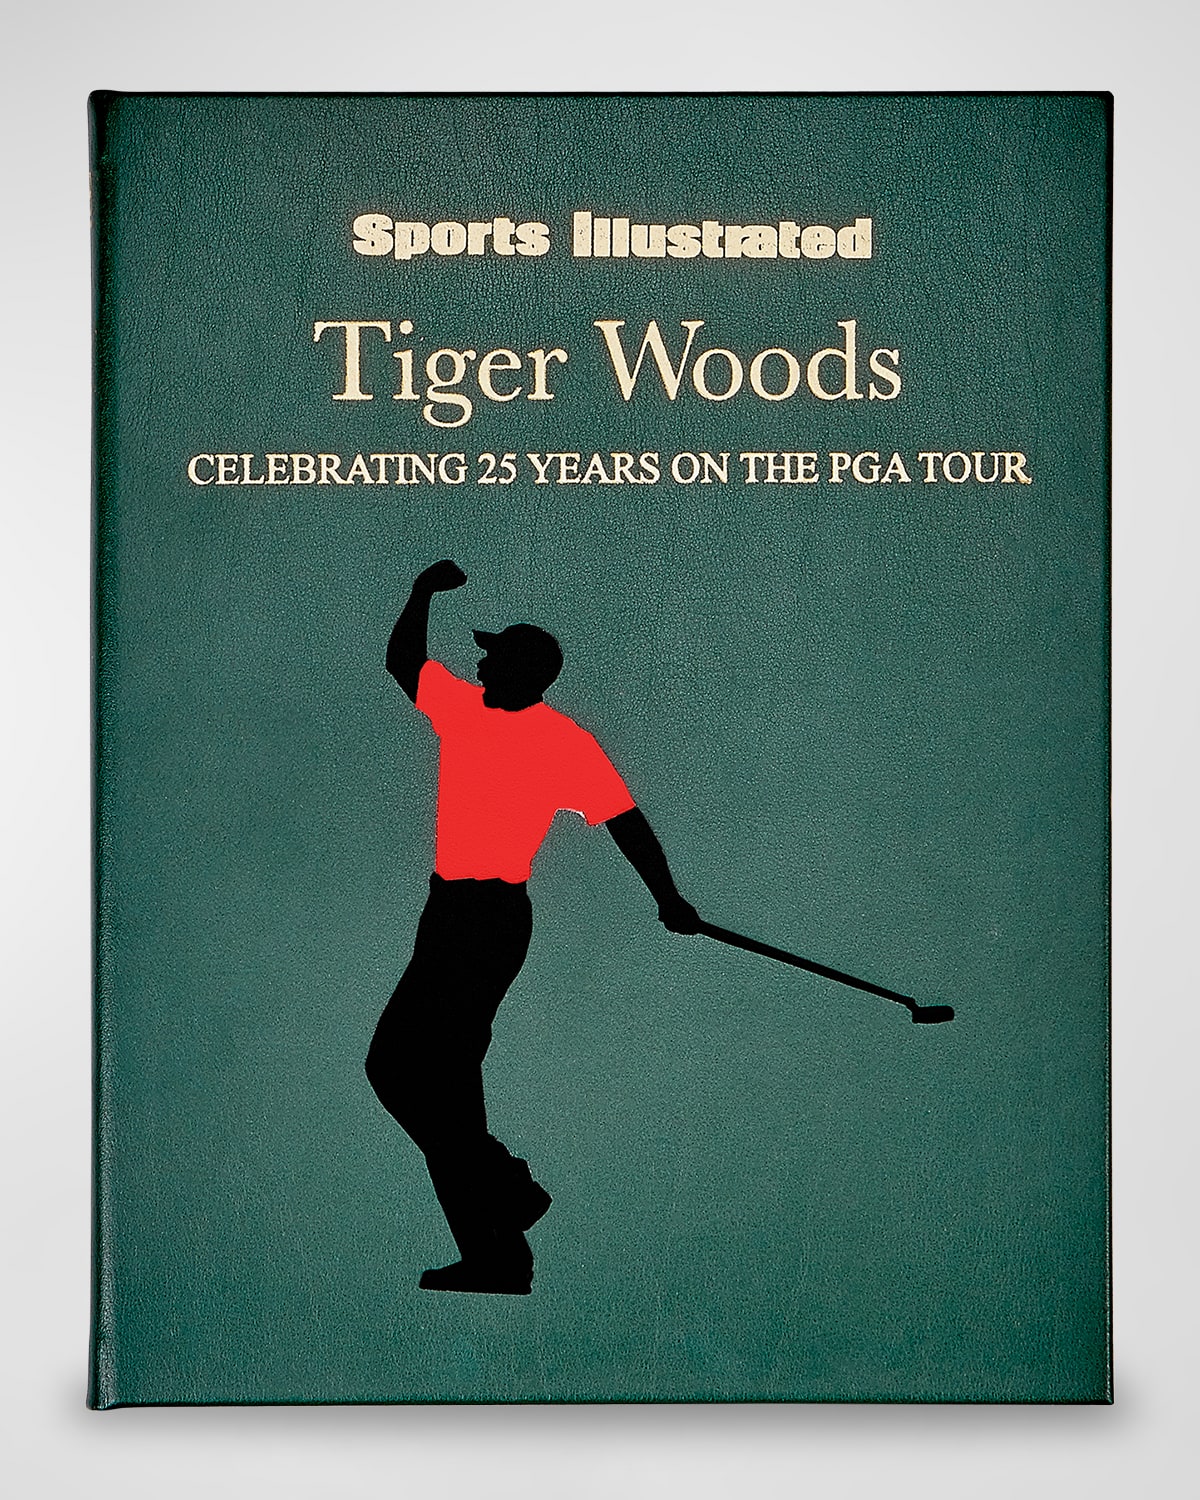 Tiger Woods - Celebrating 25 Years on the PGA Tour Personalizable Book